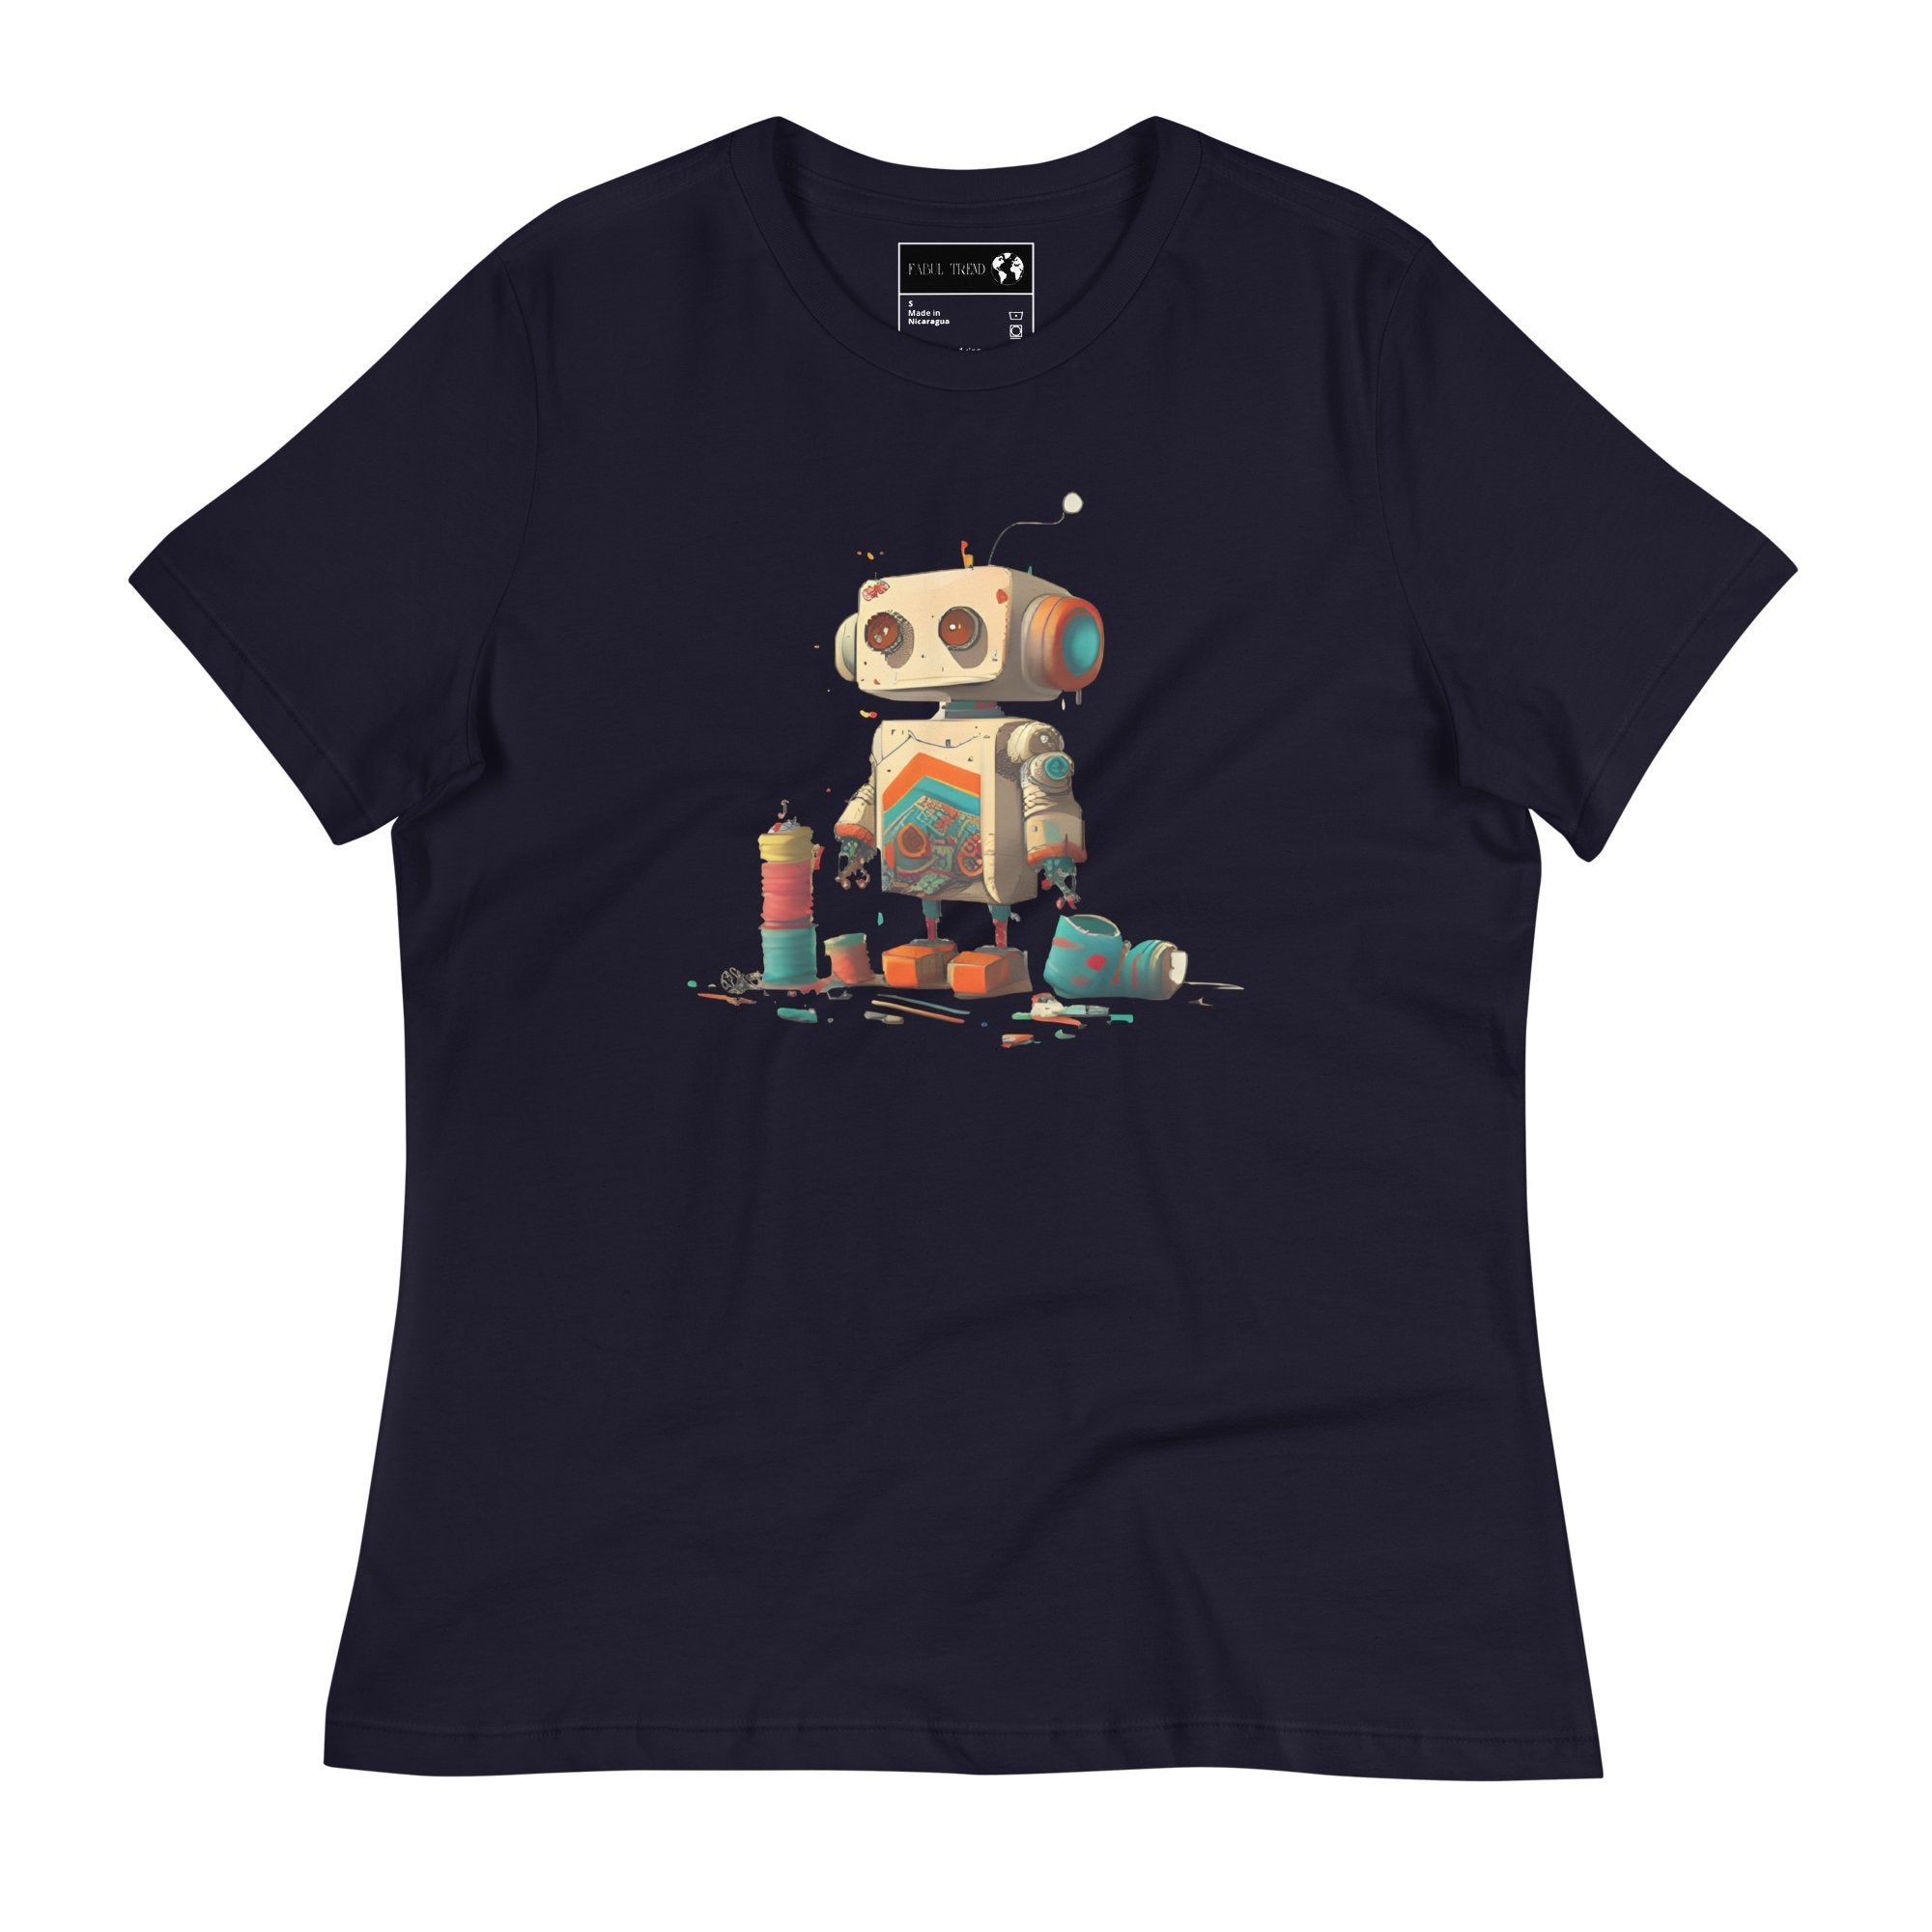 Women's relaxed t-shirt with small Robot design - FabulTrend